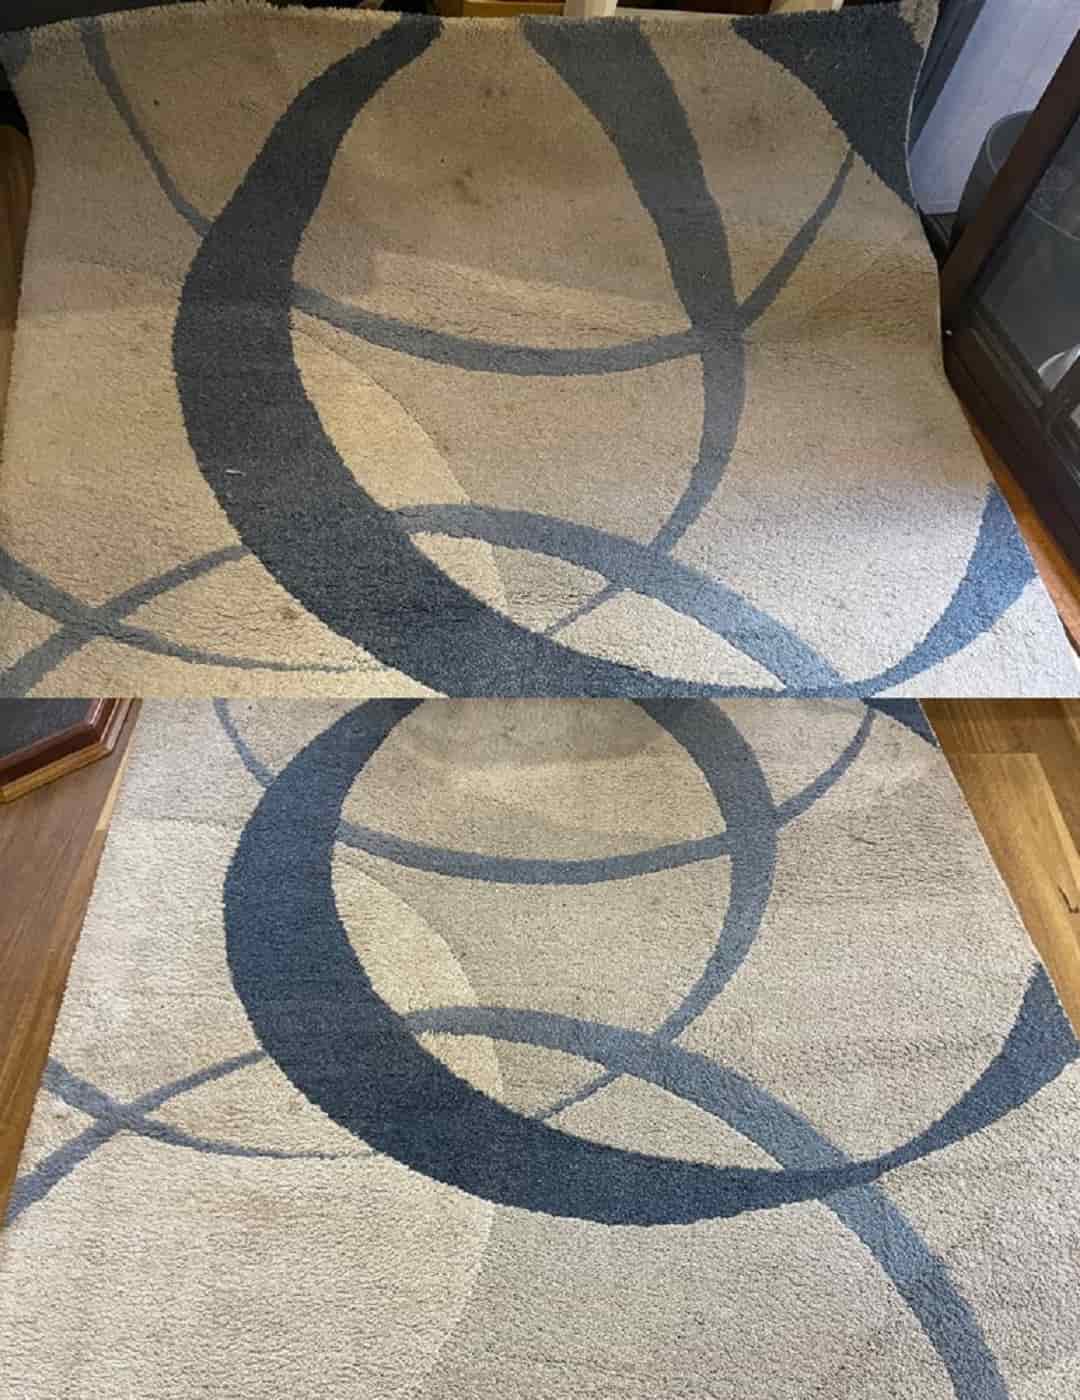 Before and after rug cleaning